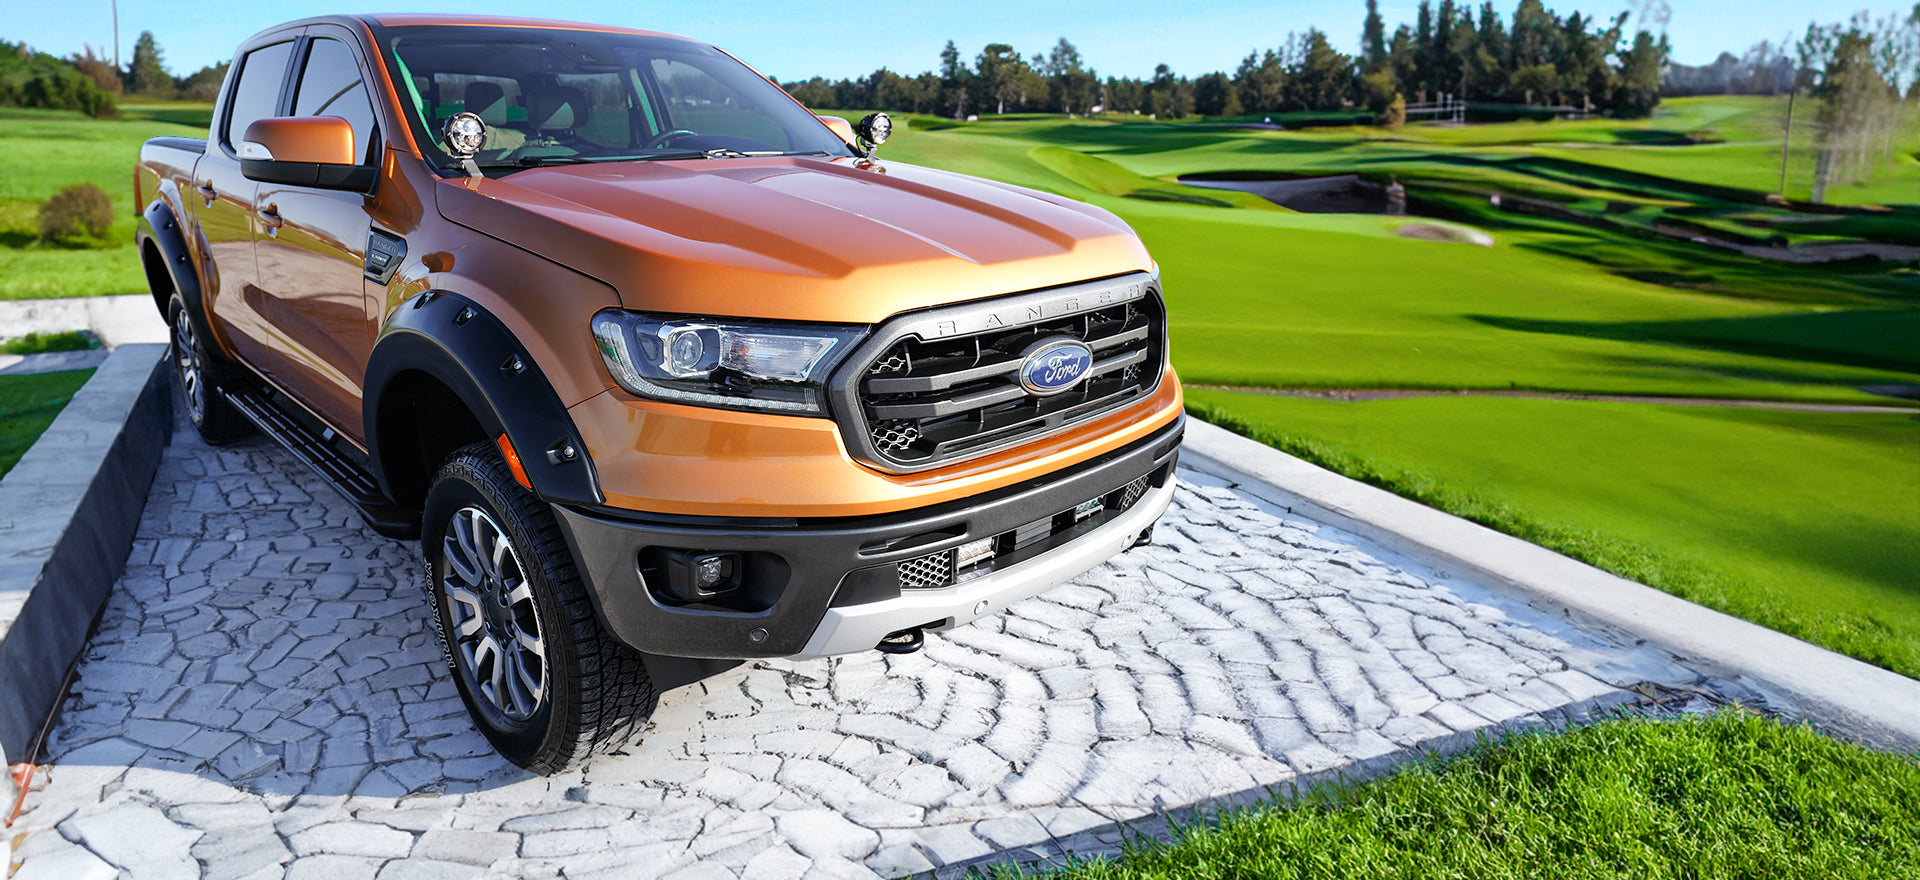 Top Ford Ranger Accessories And Upgrades